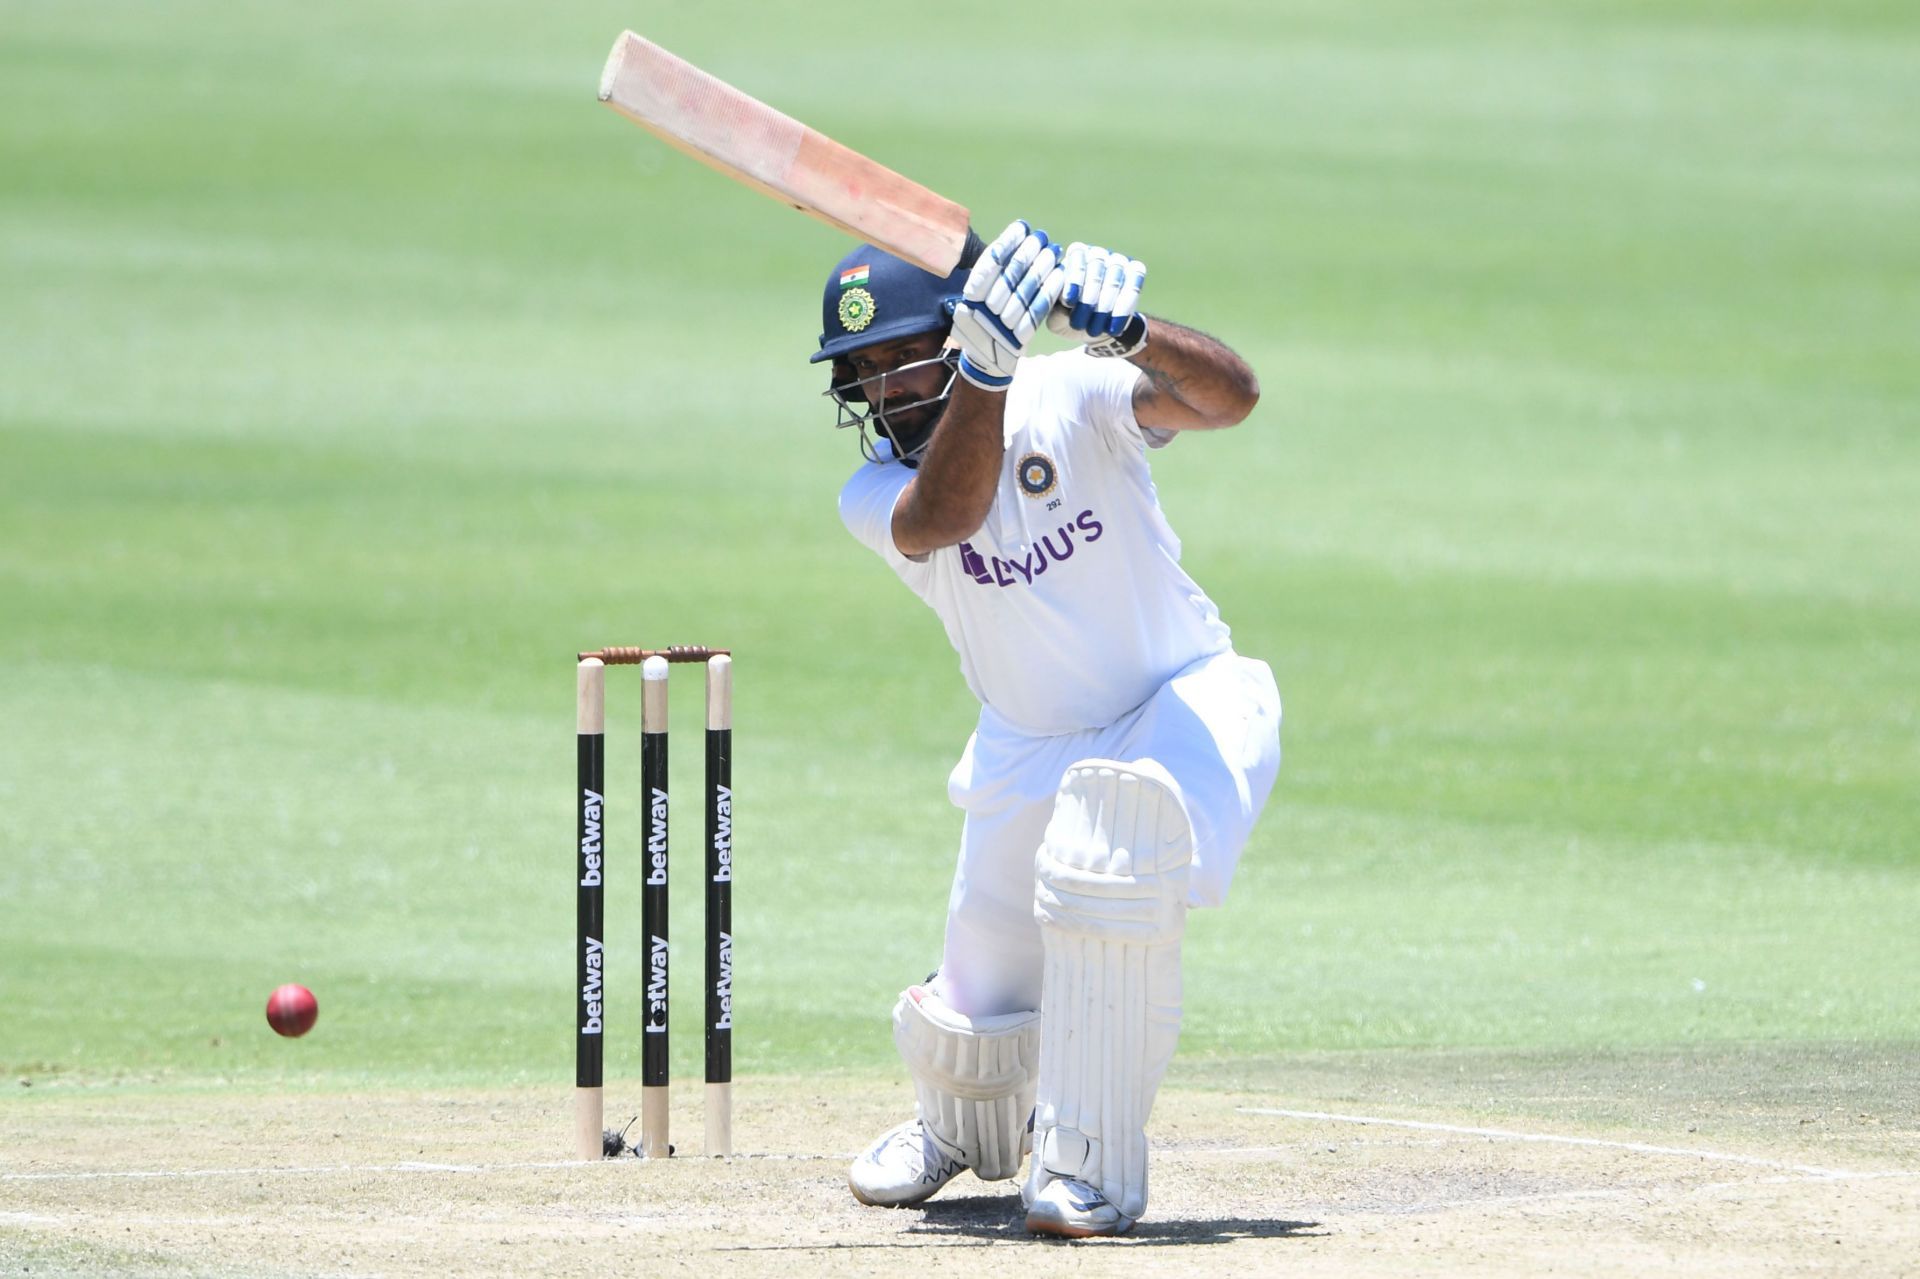 Hanuma Vihari has scored a solitary century in the 14 Tests he has played to date